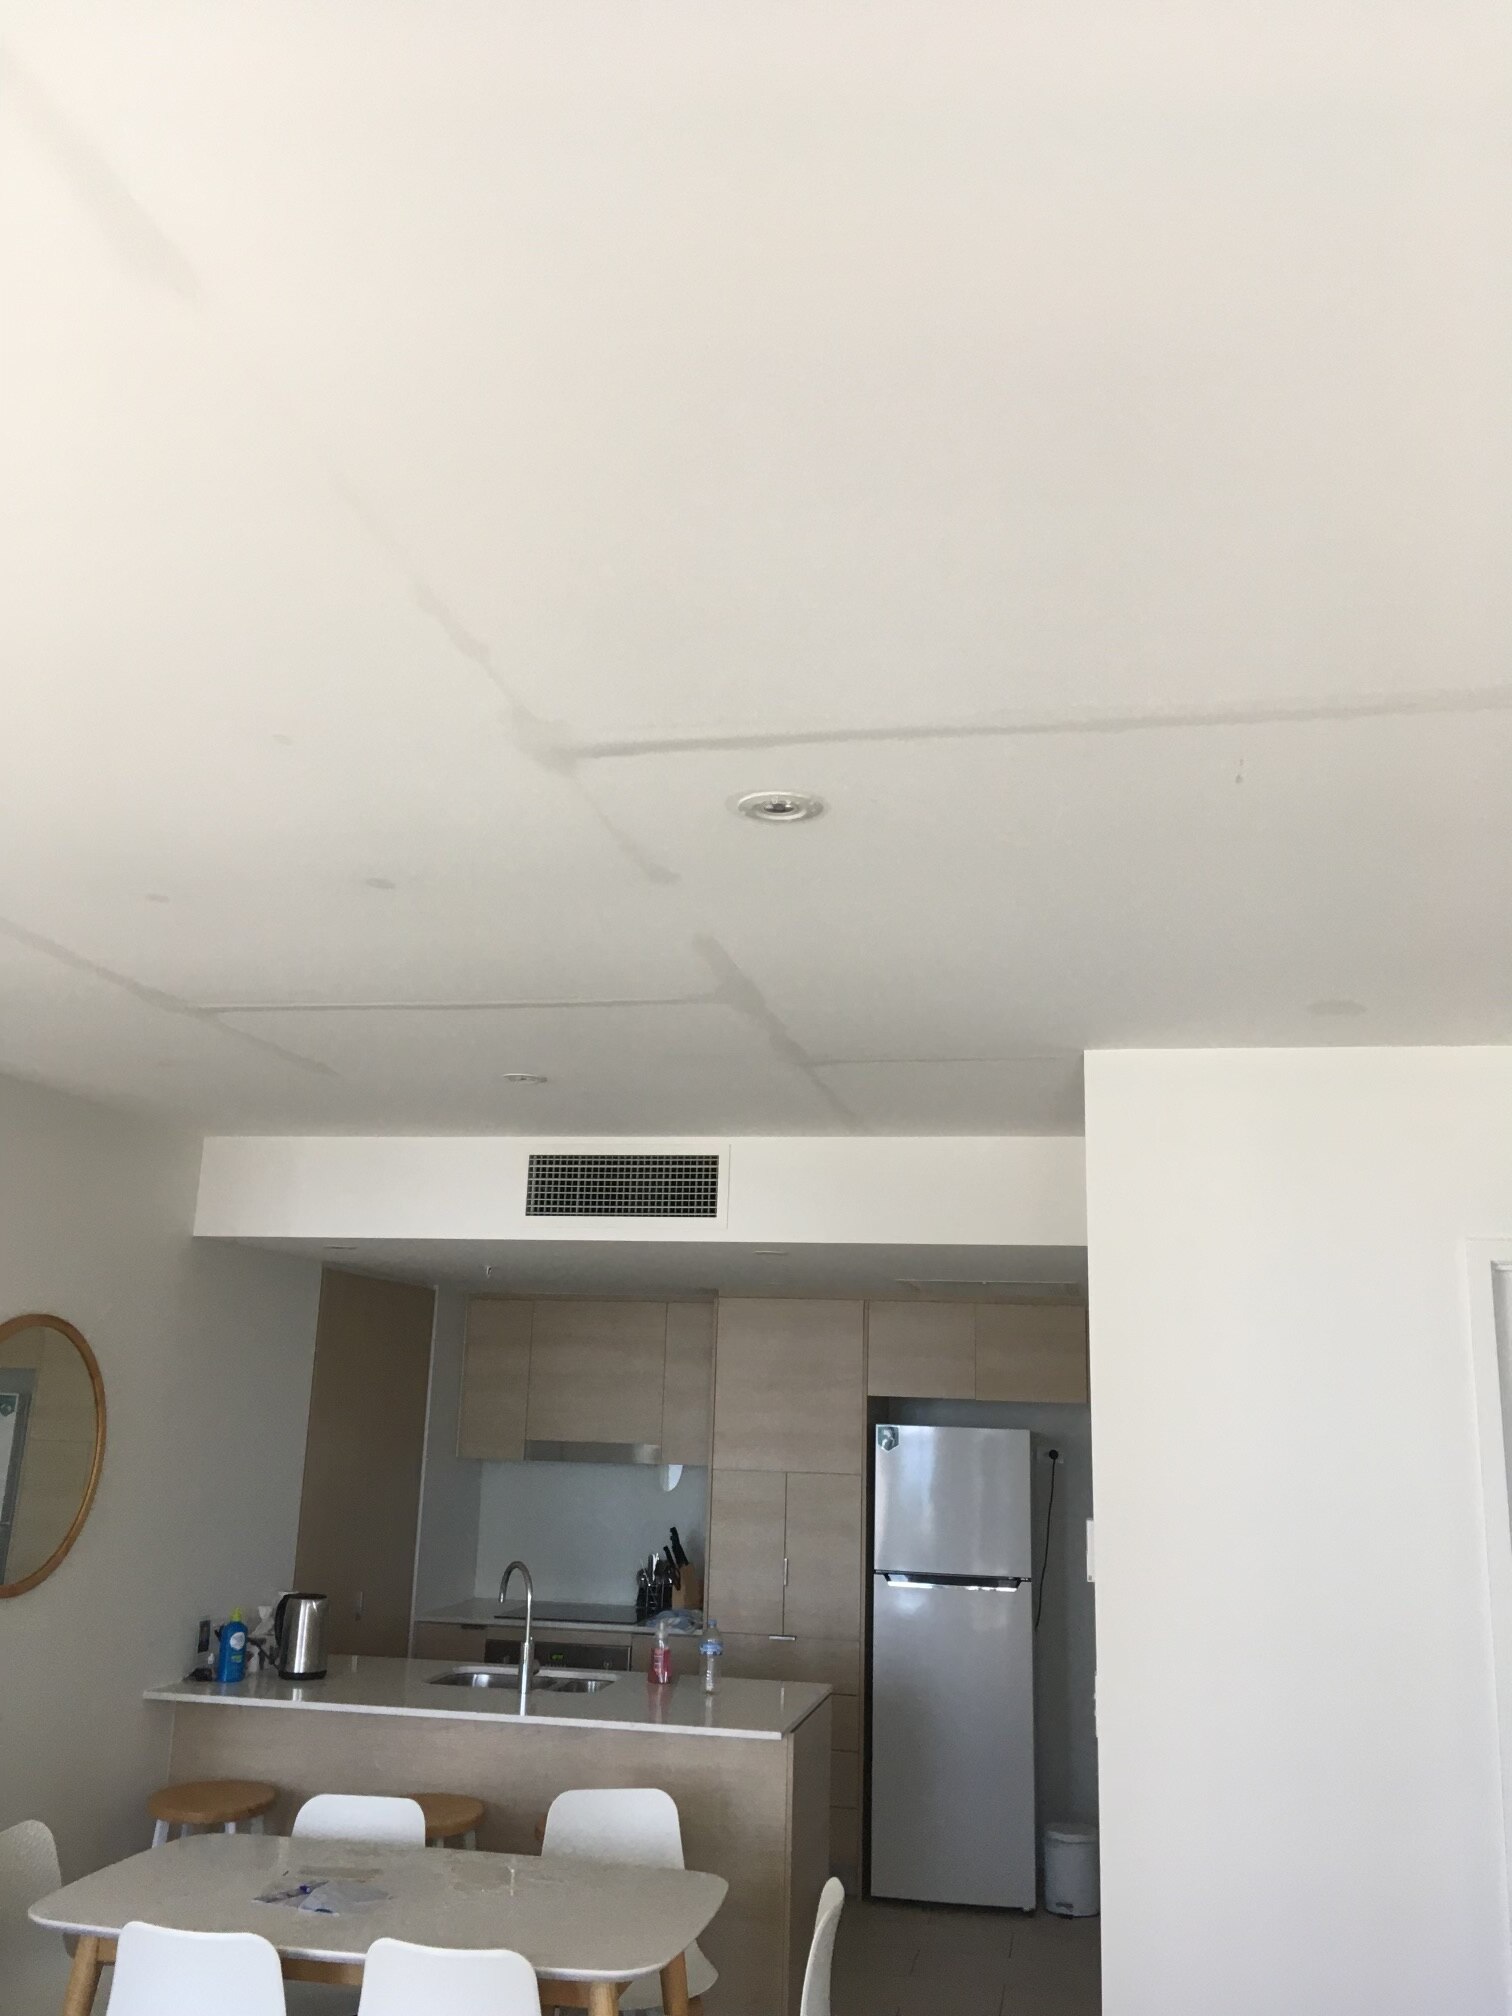 lines on the ceiling show water leaking from the apartment above